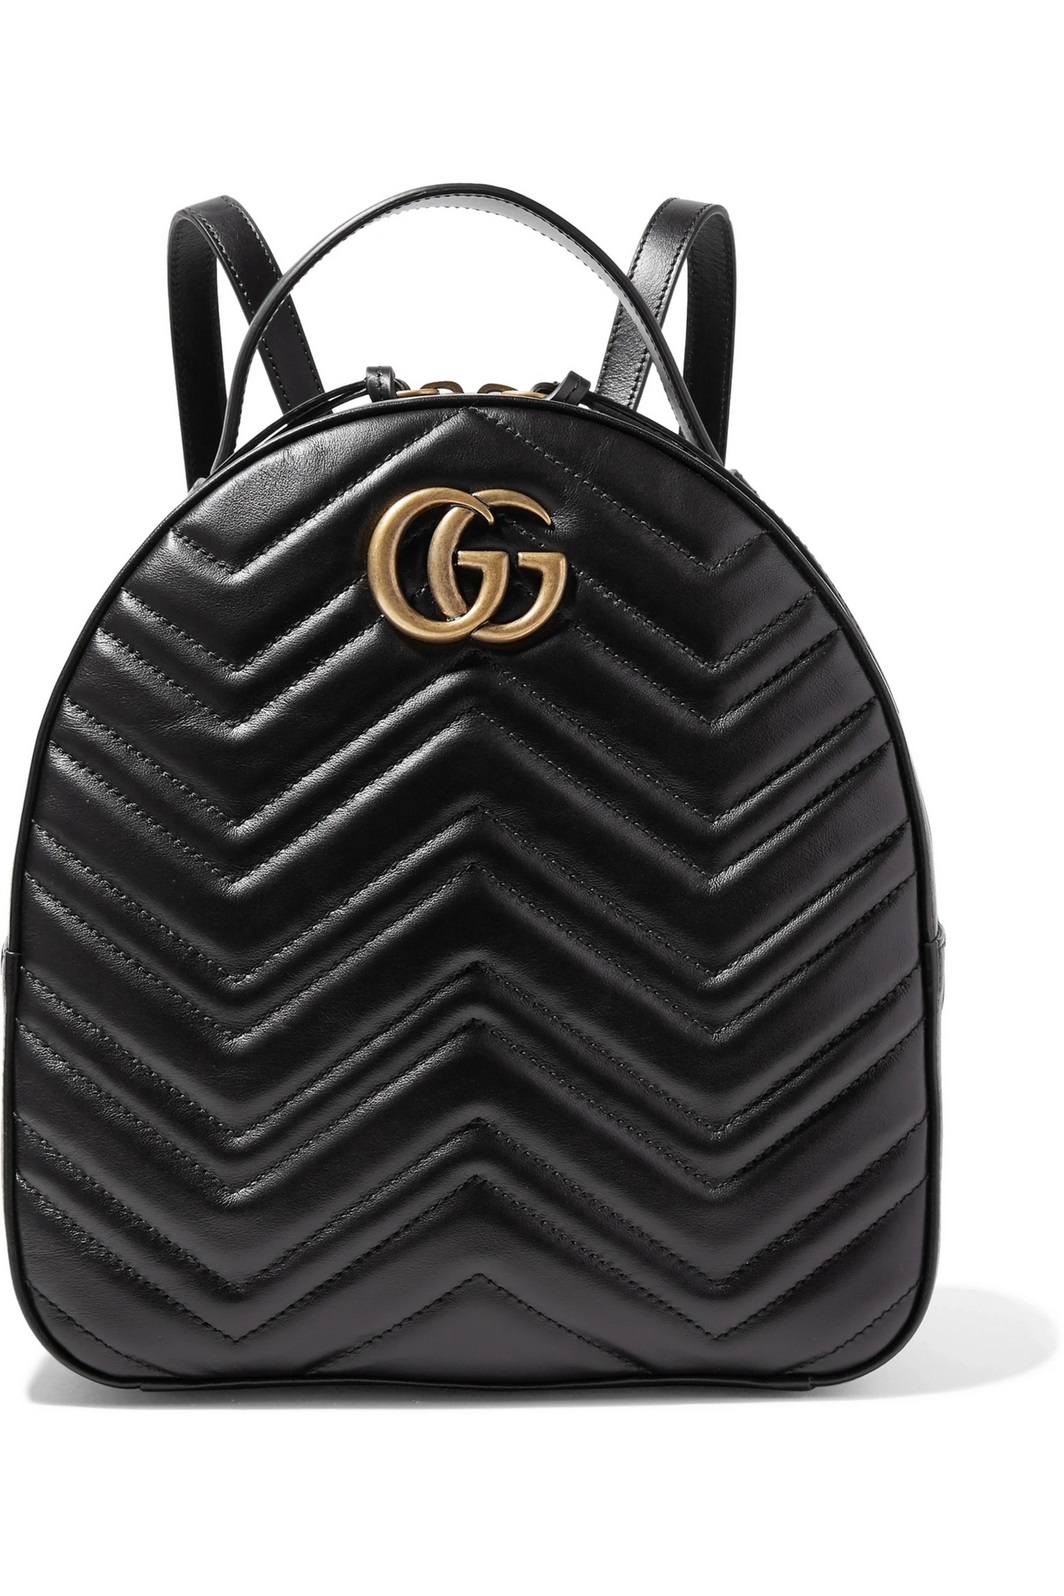  BALO NỮ GUCCI MARMONT BACKPACK 1